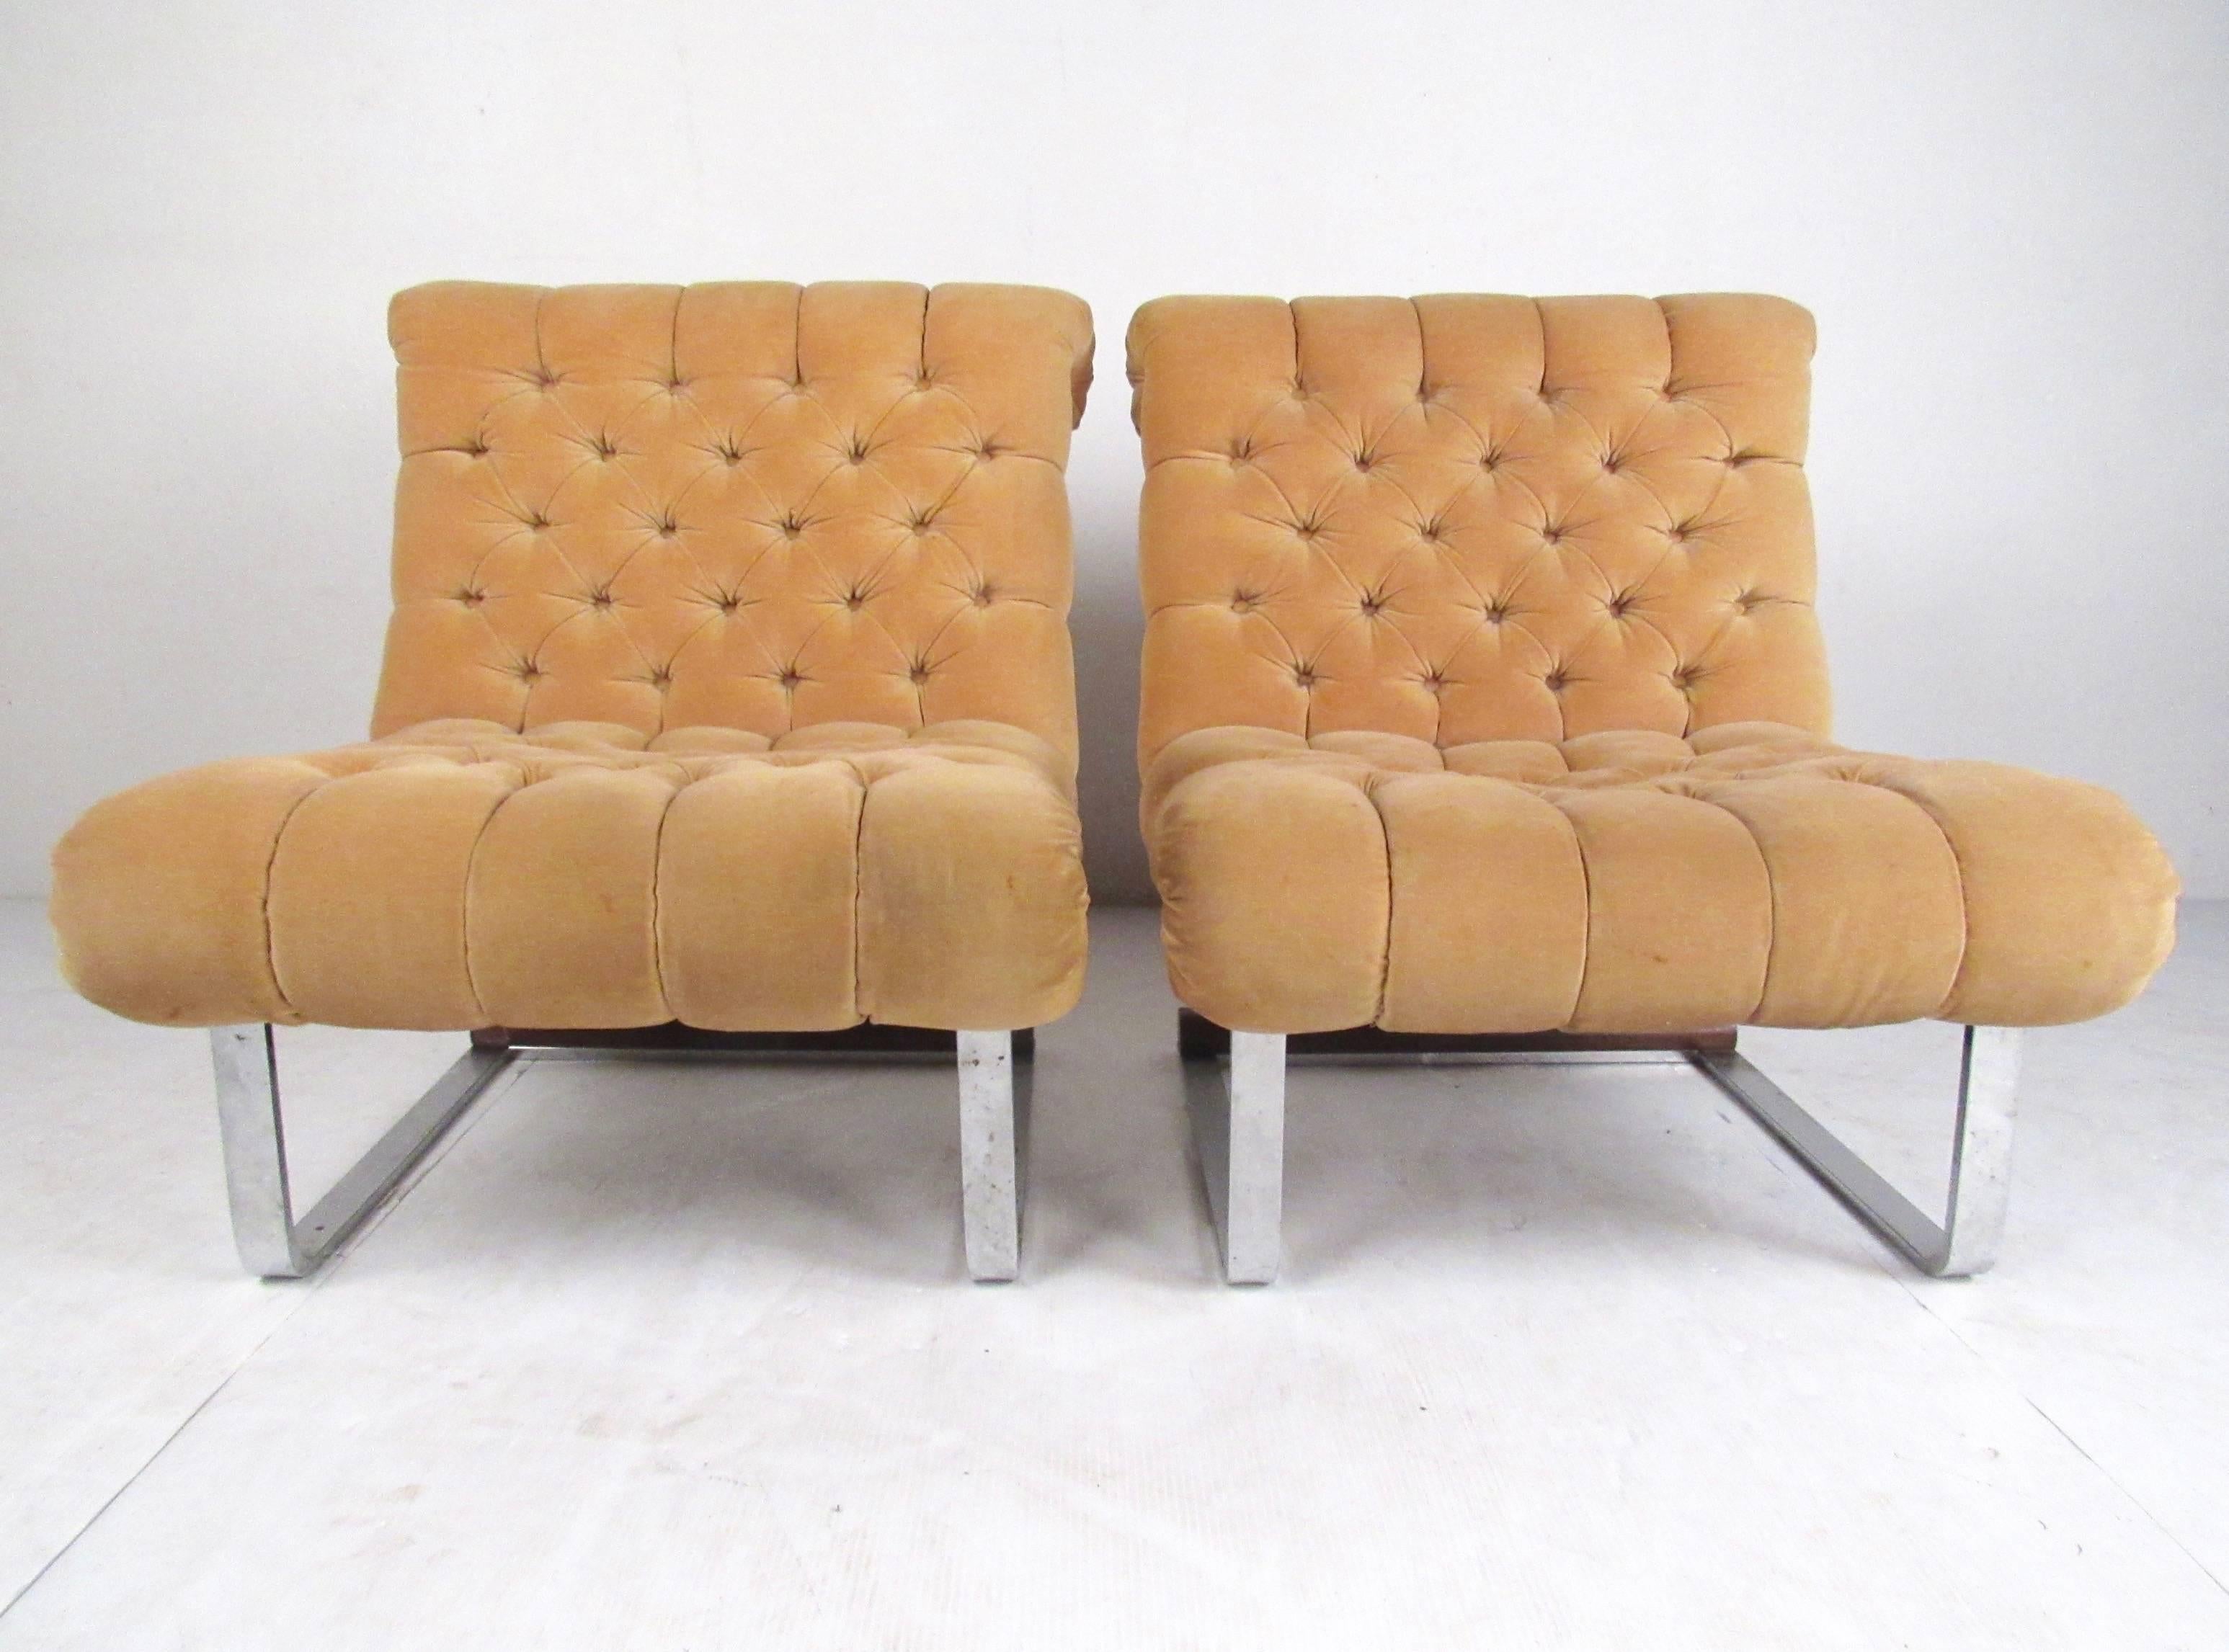 This pair of Mid-Century Modern lounge chairs features heavy chrome cantilever base, tufted vintage fabric, and unique Italian modern design. Sculpted seats make an elegant vintage modern addition to home or business seating, while the